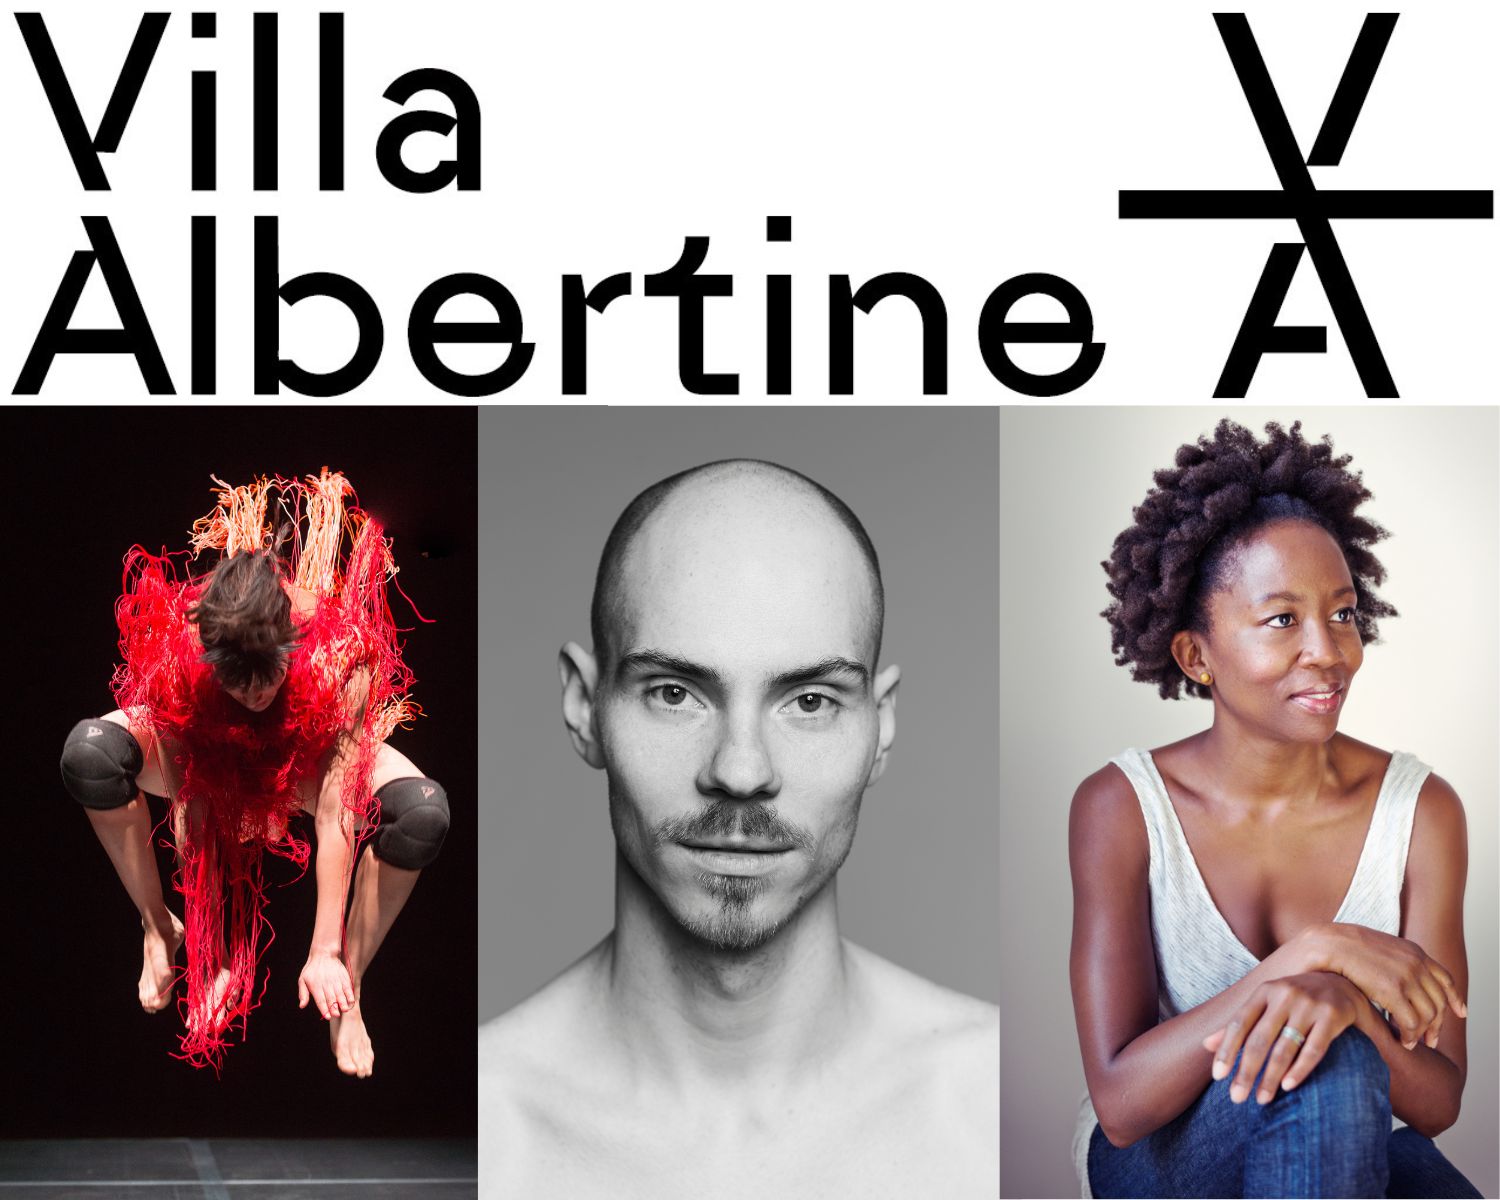 Bard College Dance Program Launches Two-Year Partnership with Villa Albertine 